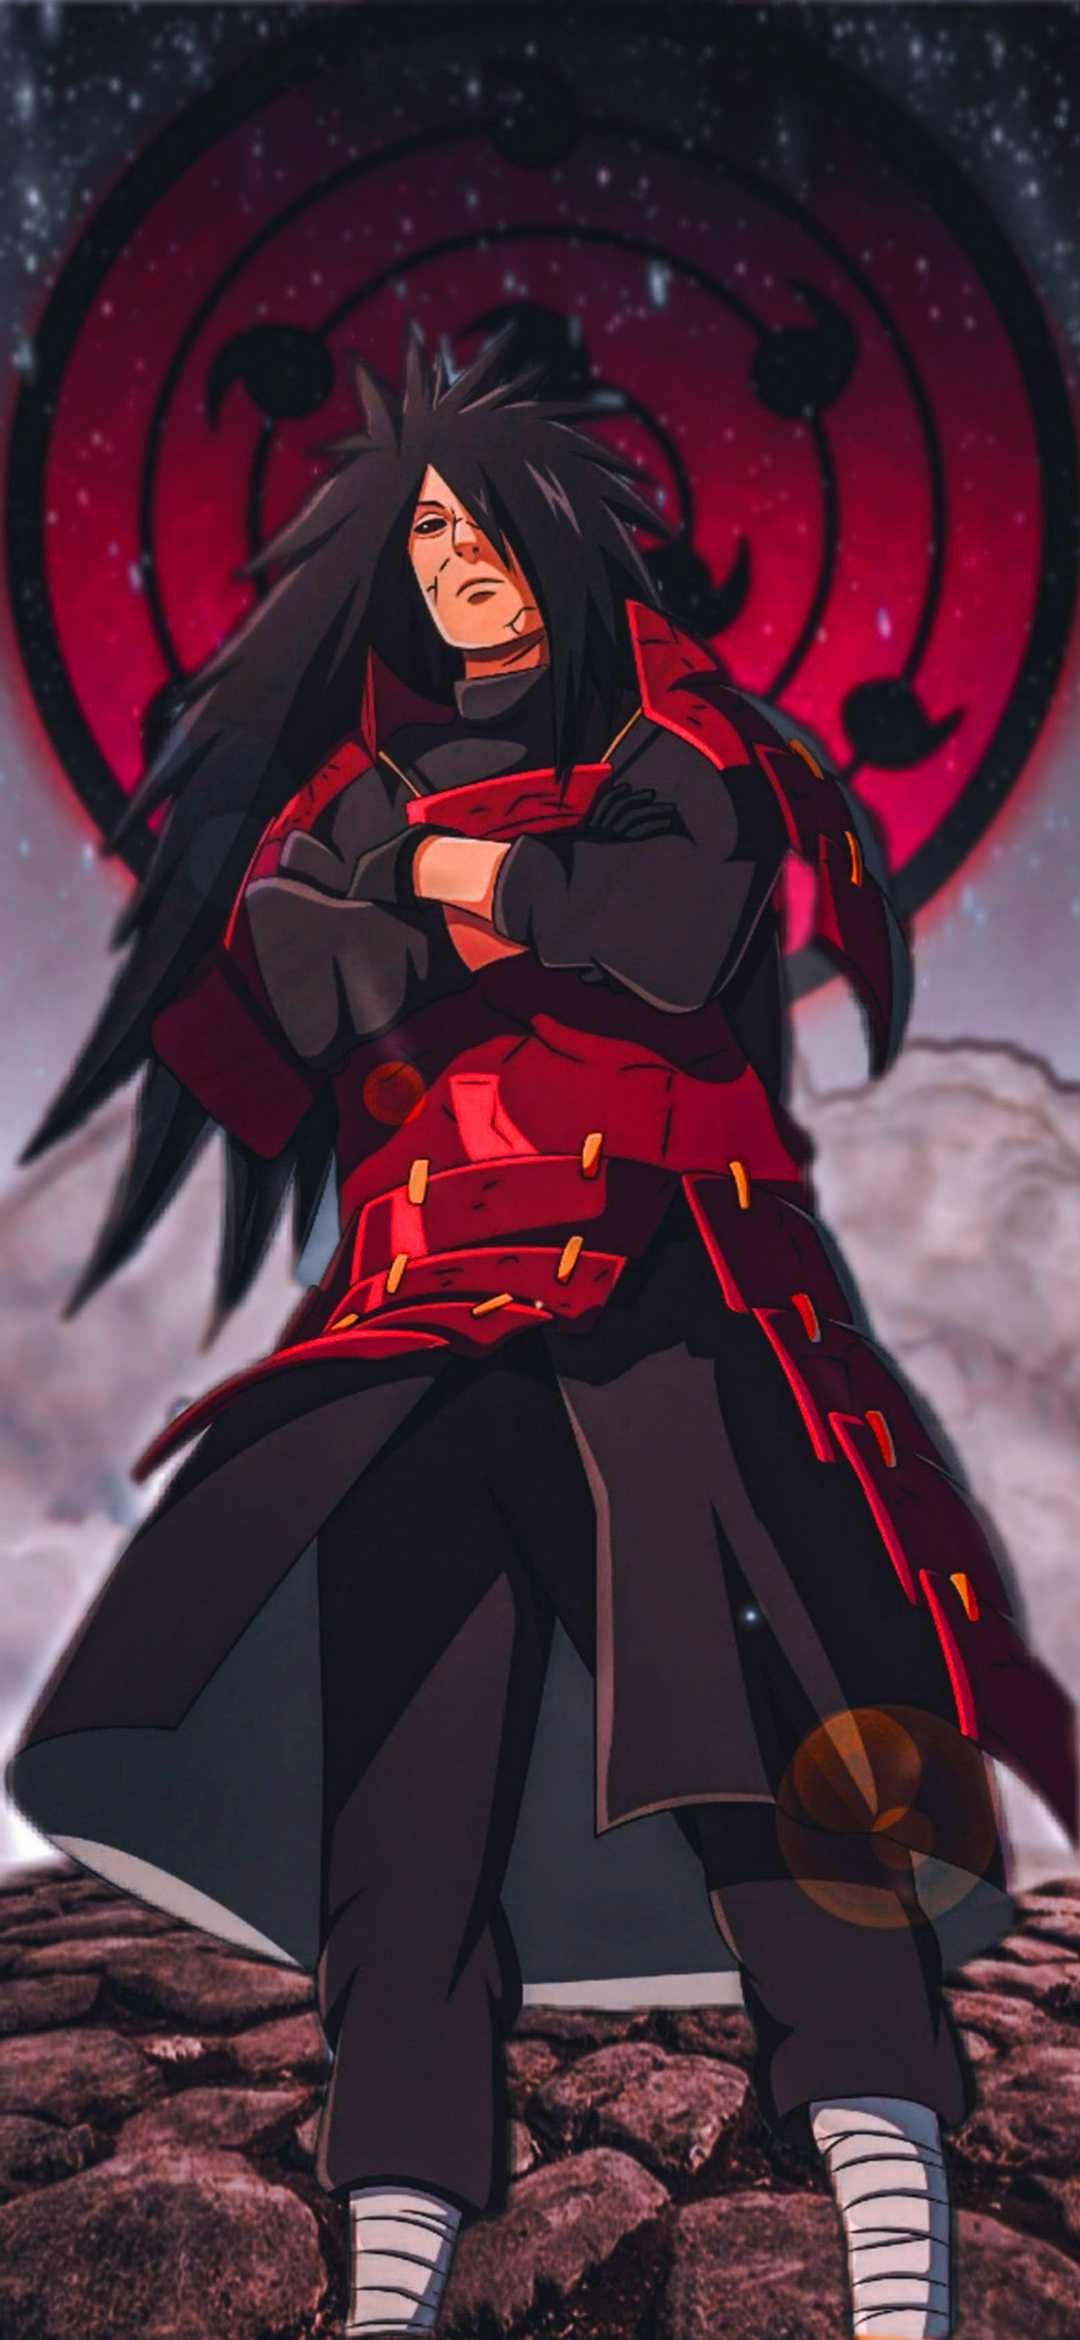 Download Madara Uchiha, an iconic figure in the anime world | Wallpapers.com